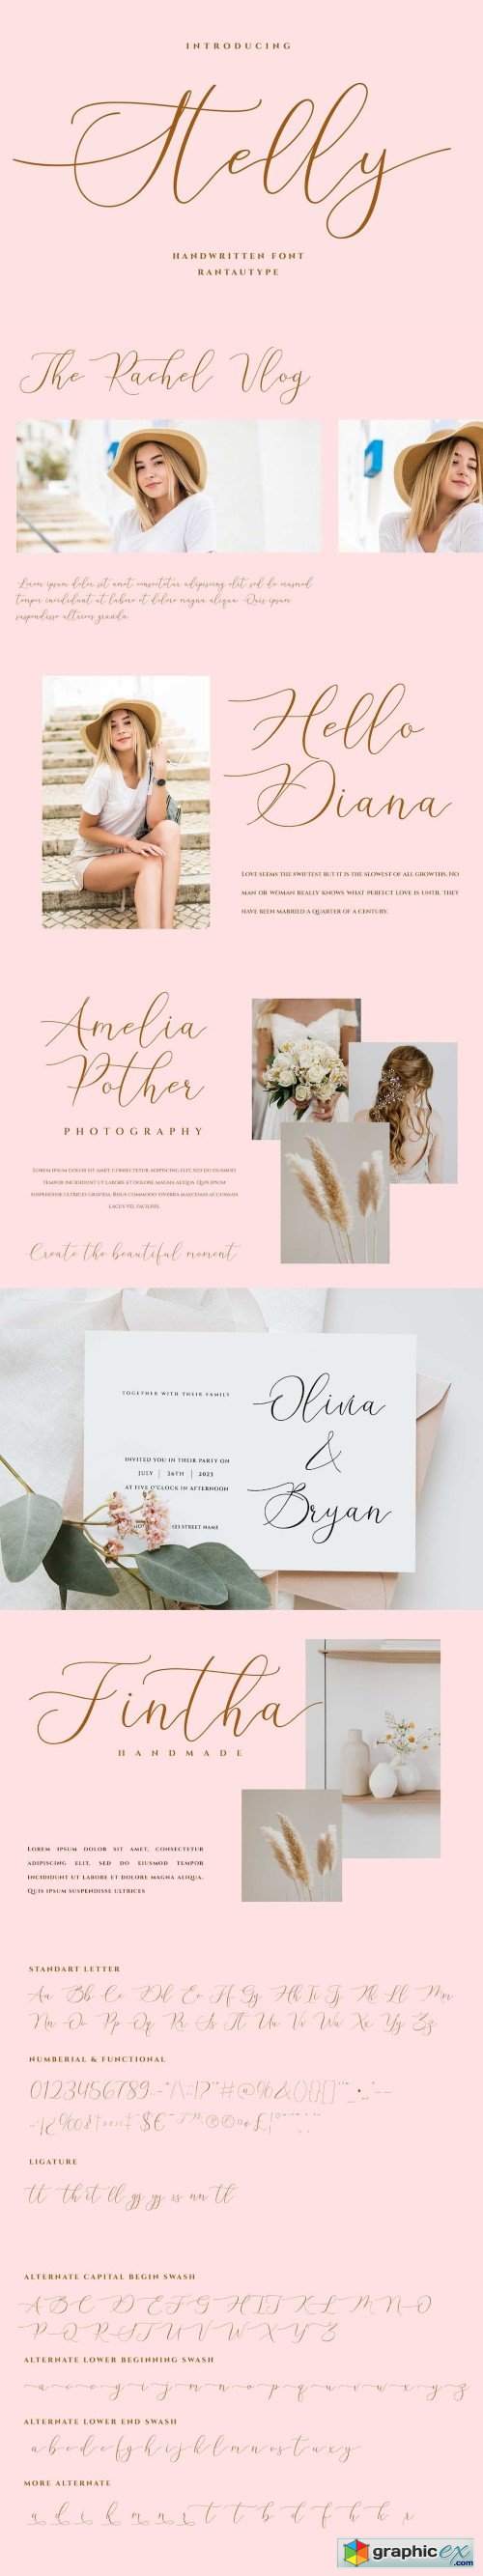 Stelly Calligraphy Font